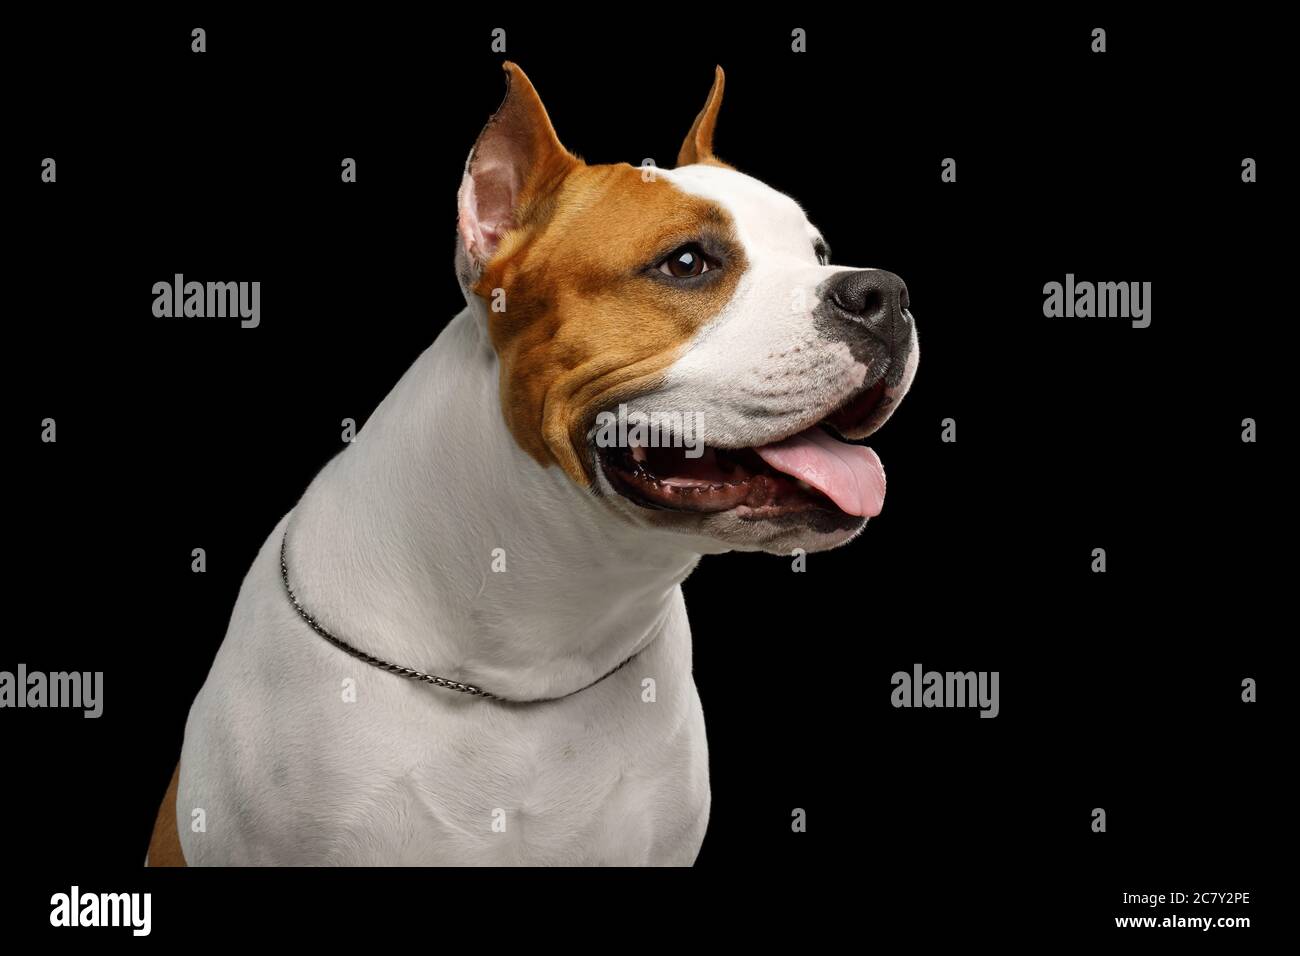 Portrait of White with Red American Staffordshire Terrier Dog in Profile view Isolated on Black Background Stock Photo